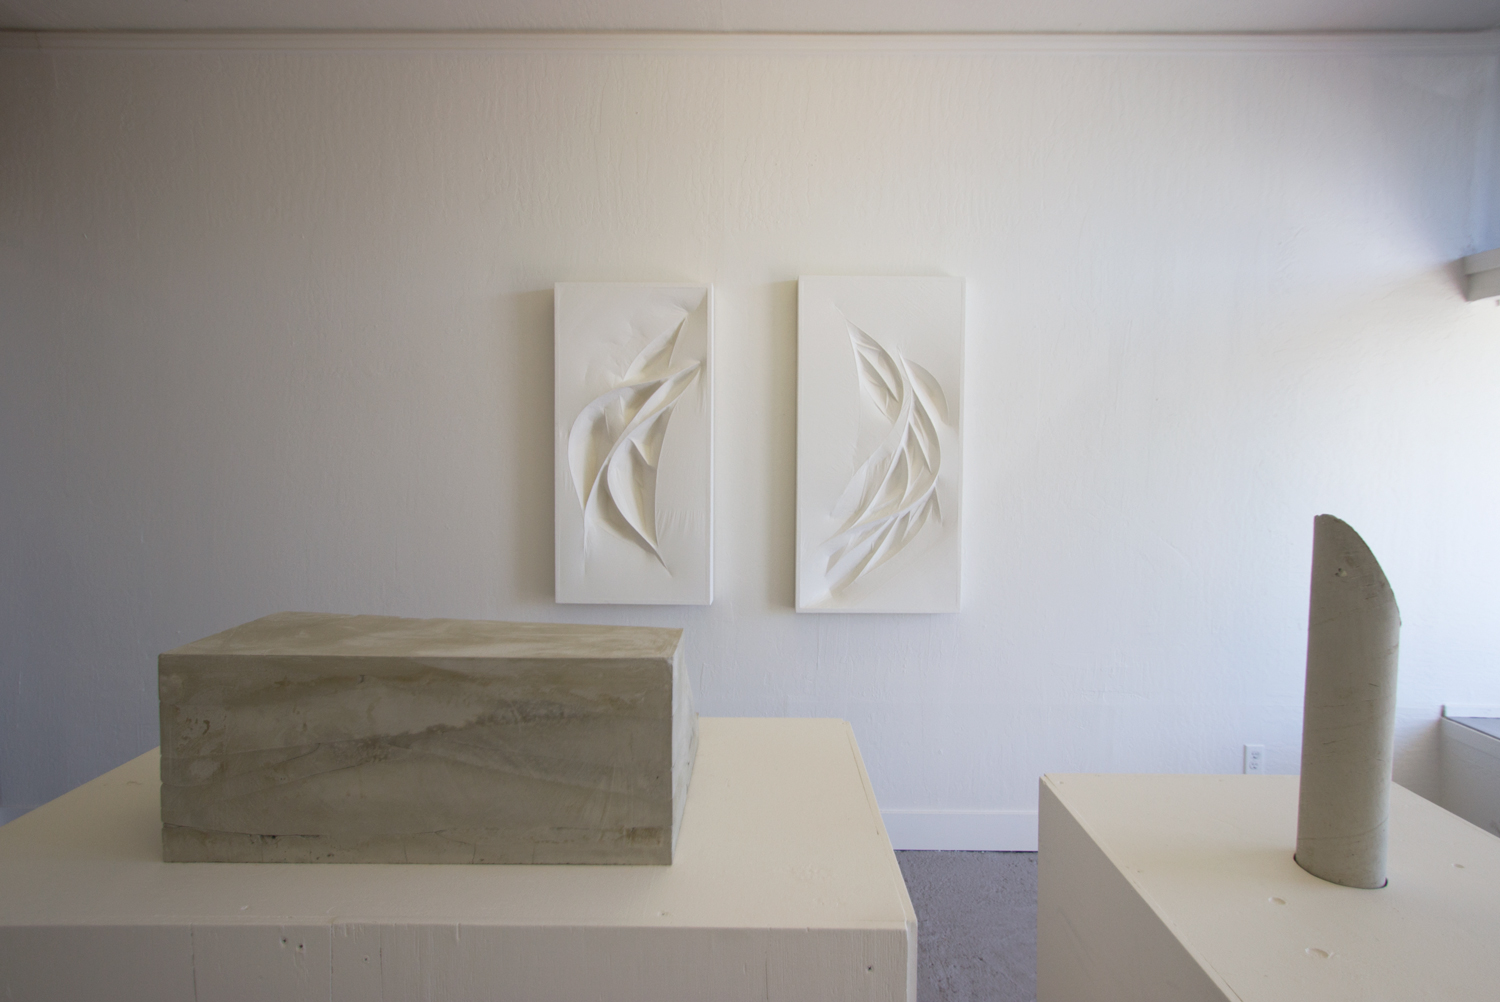   Custom Built-In   2015  Installation view (Untitled (white forms) shown center) 